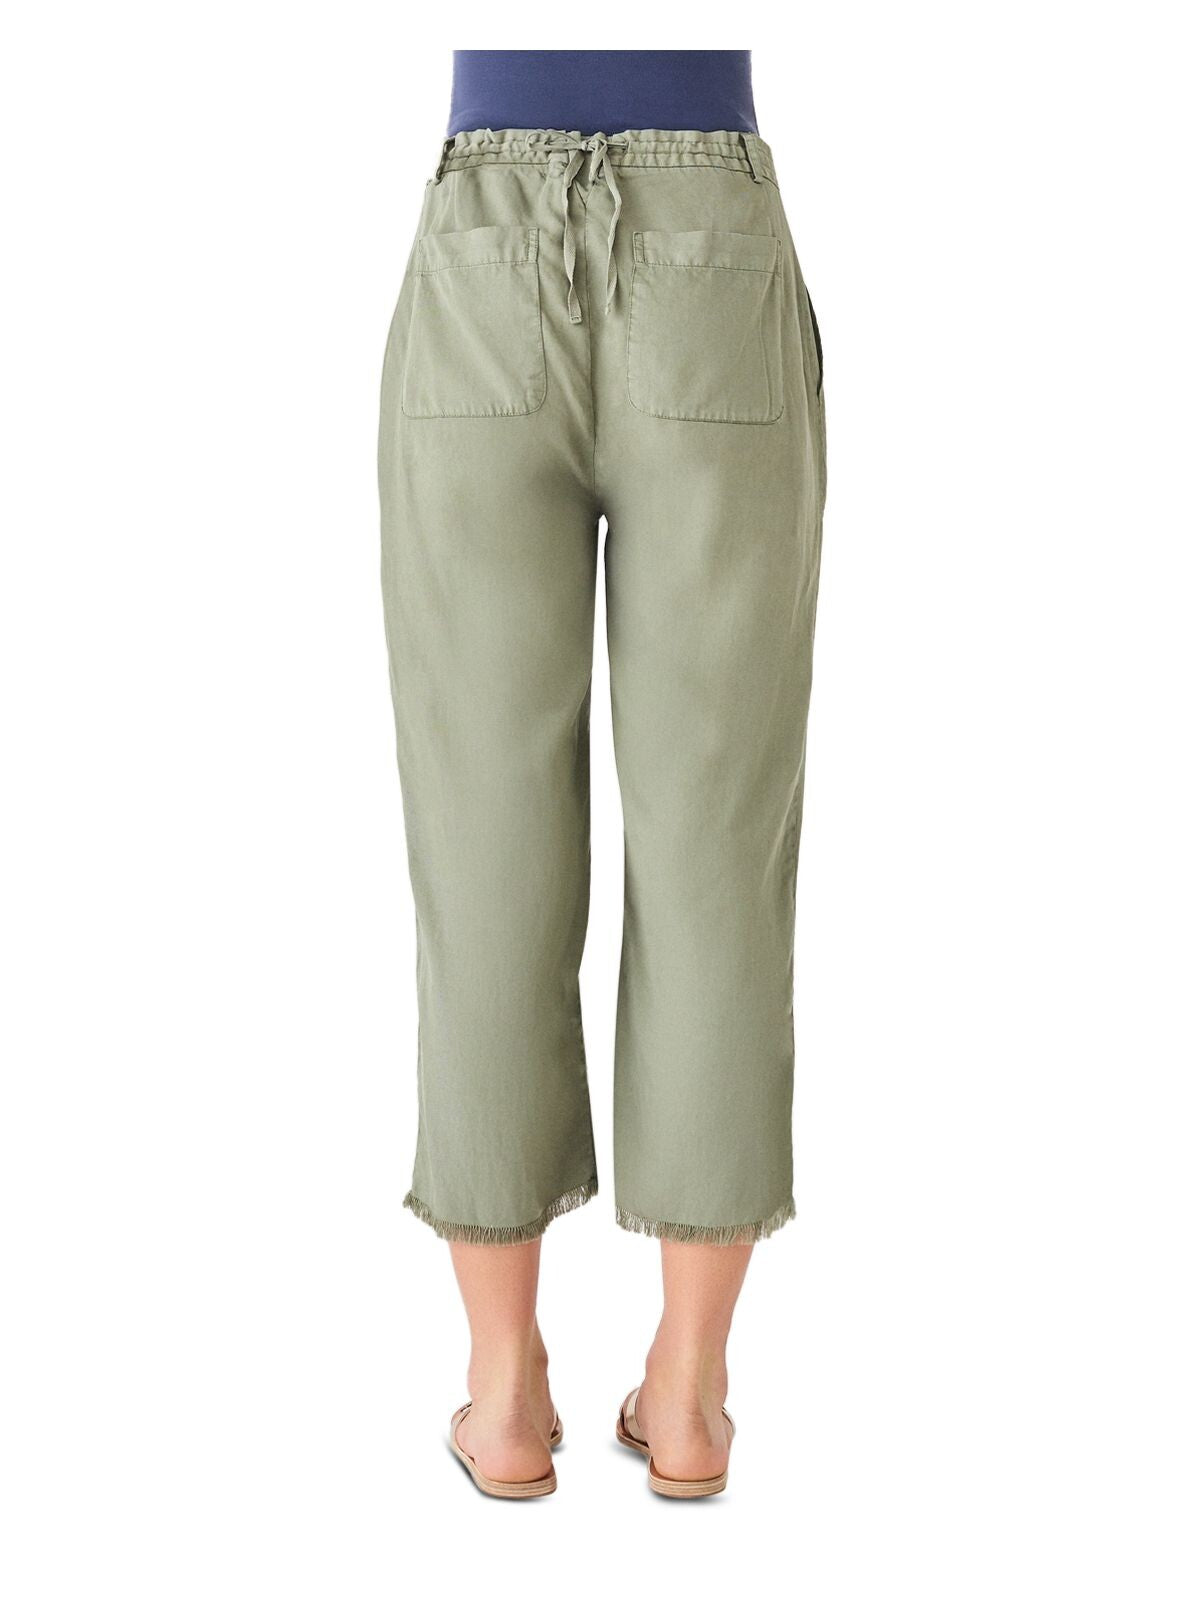 DL1961 Womens Green Pocketed Frayed Button Fly Drawstring Back Crop Straight leg Pants XS